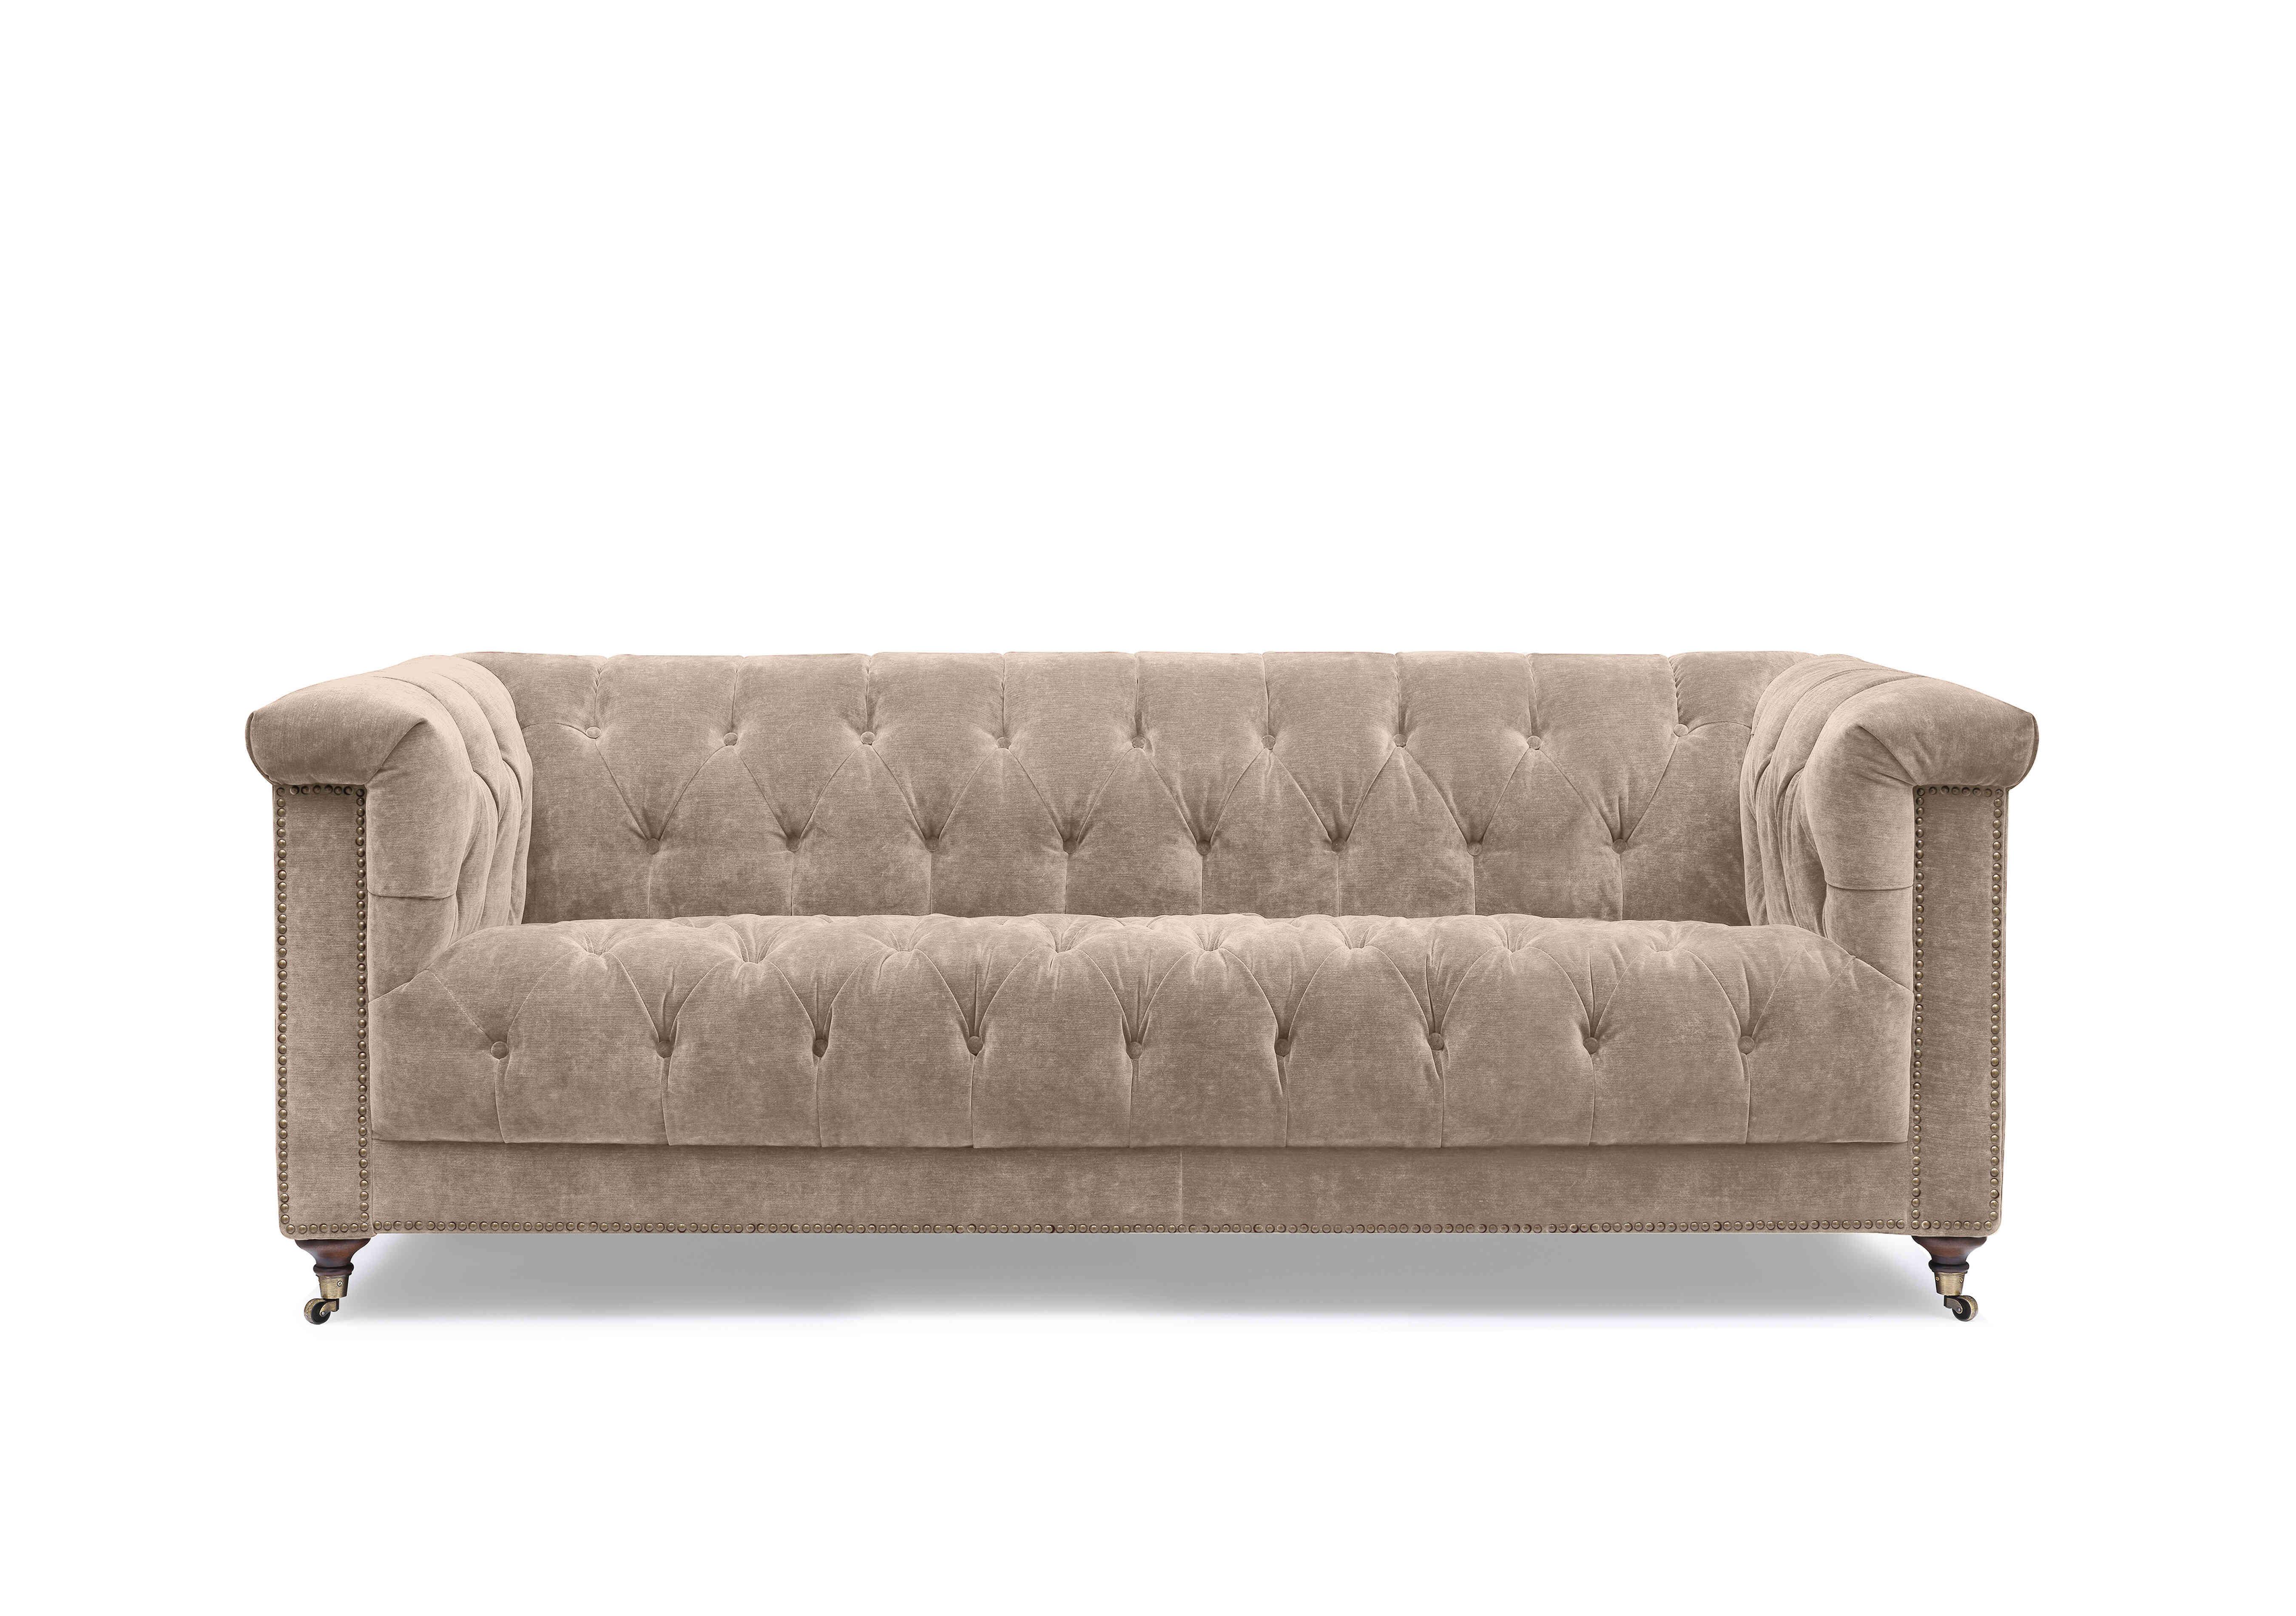 Wallace 3 Seater Fabric Chesterfield Sofa with USB-C in X3y1-W022 Barley on Furniture Village